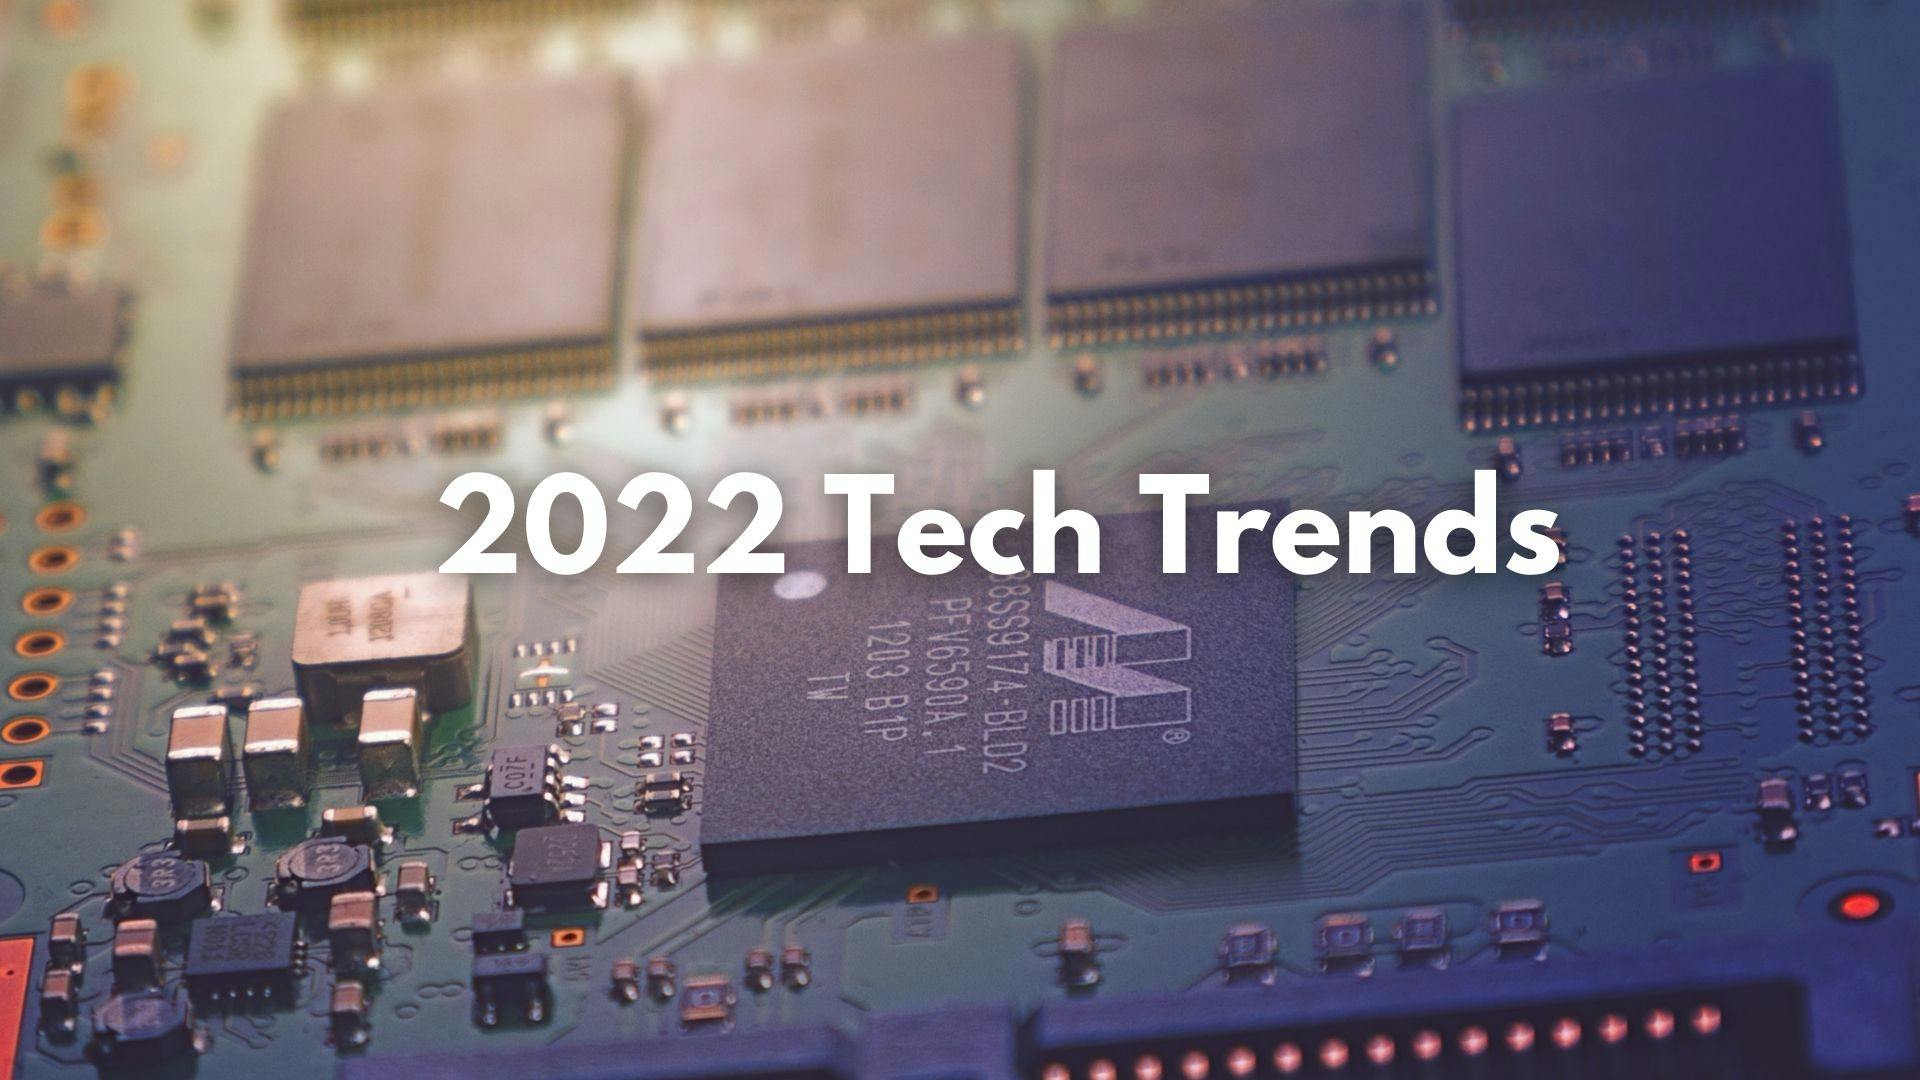 Top 5 Technology Trends of 2022